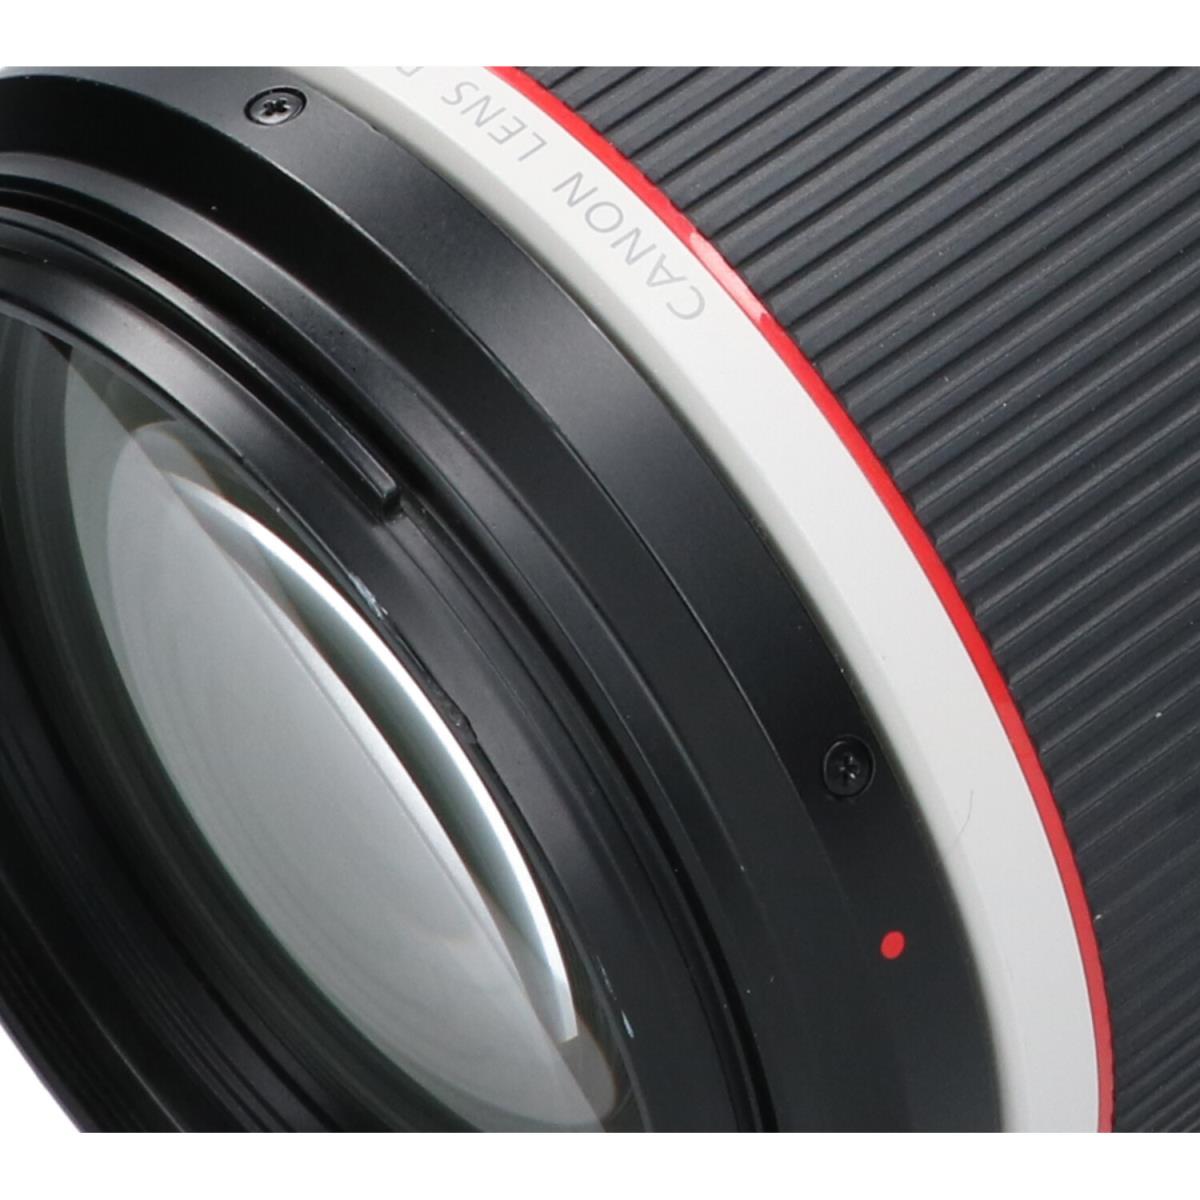 CANON RF100-500mm F4.5-7.1L IS USM